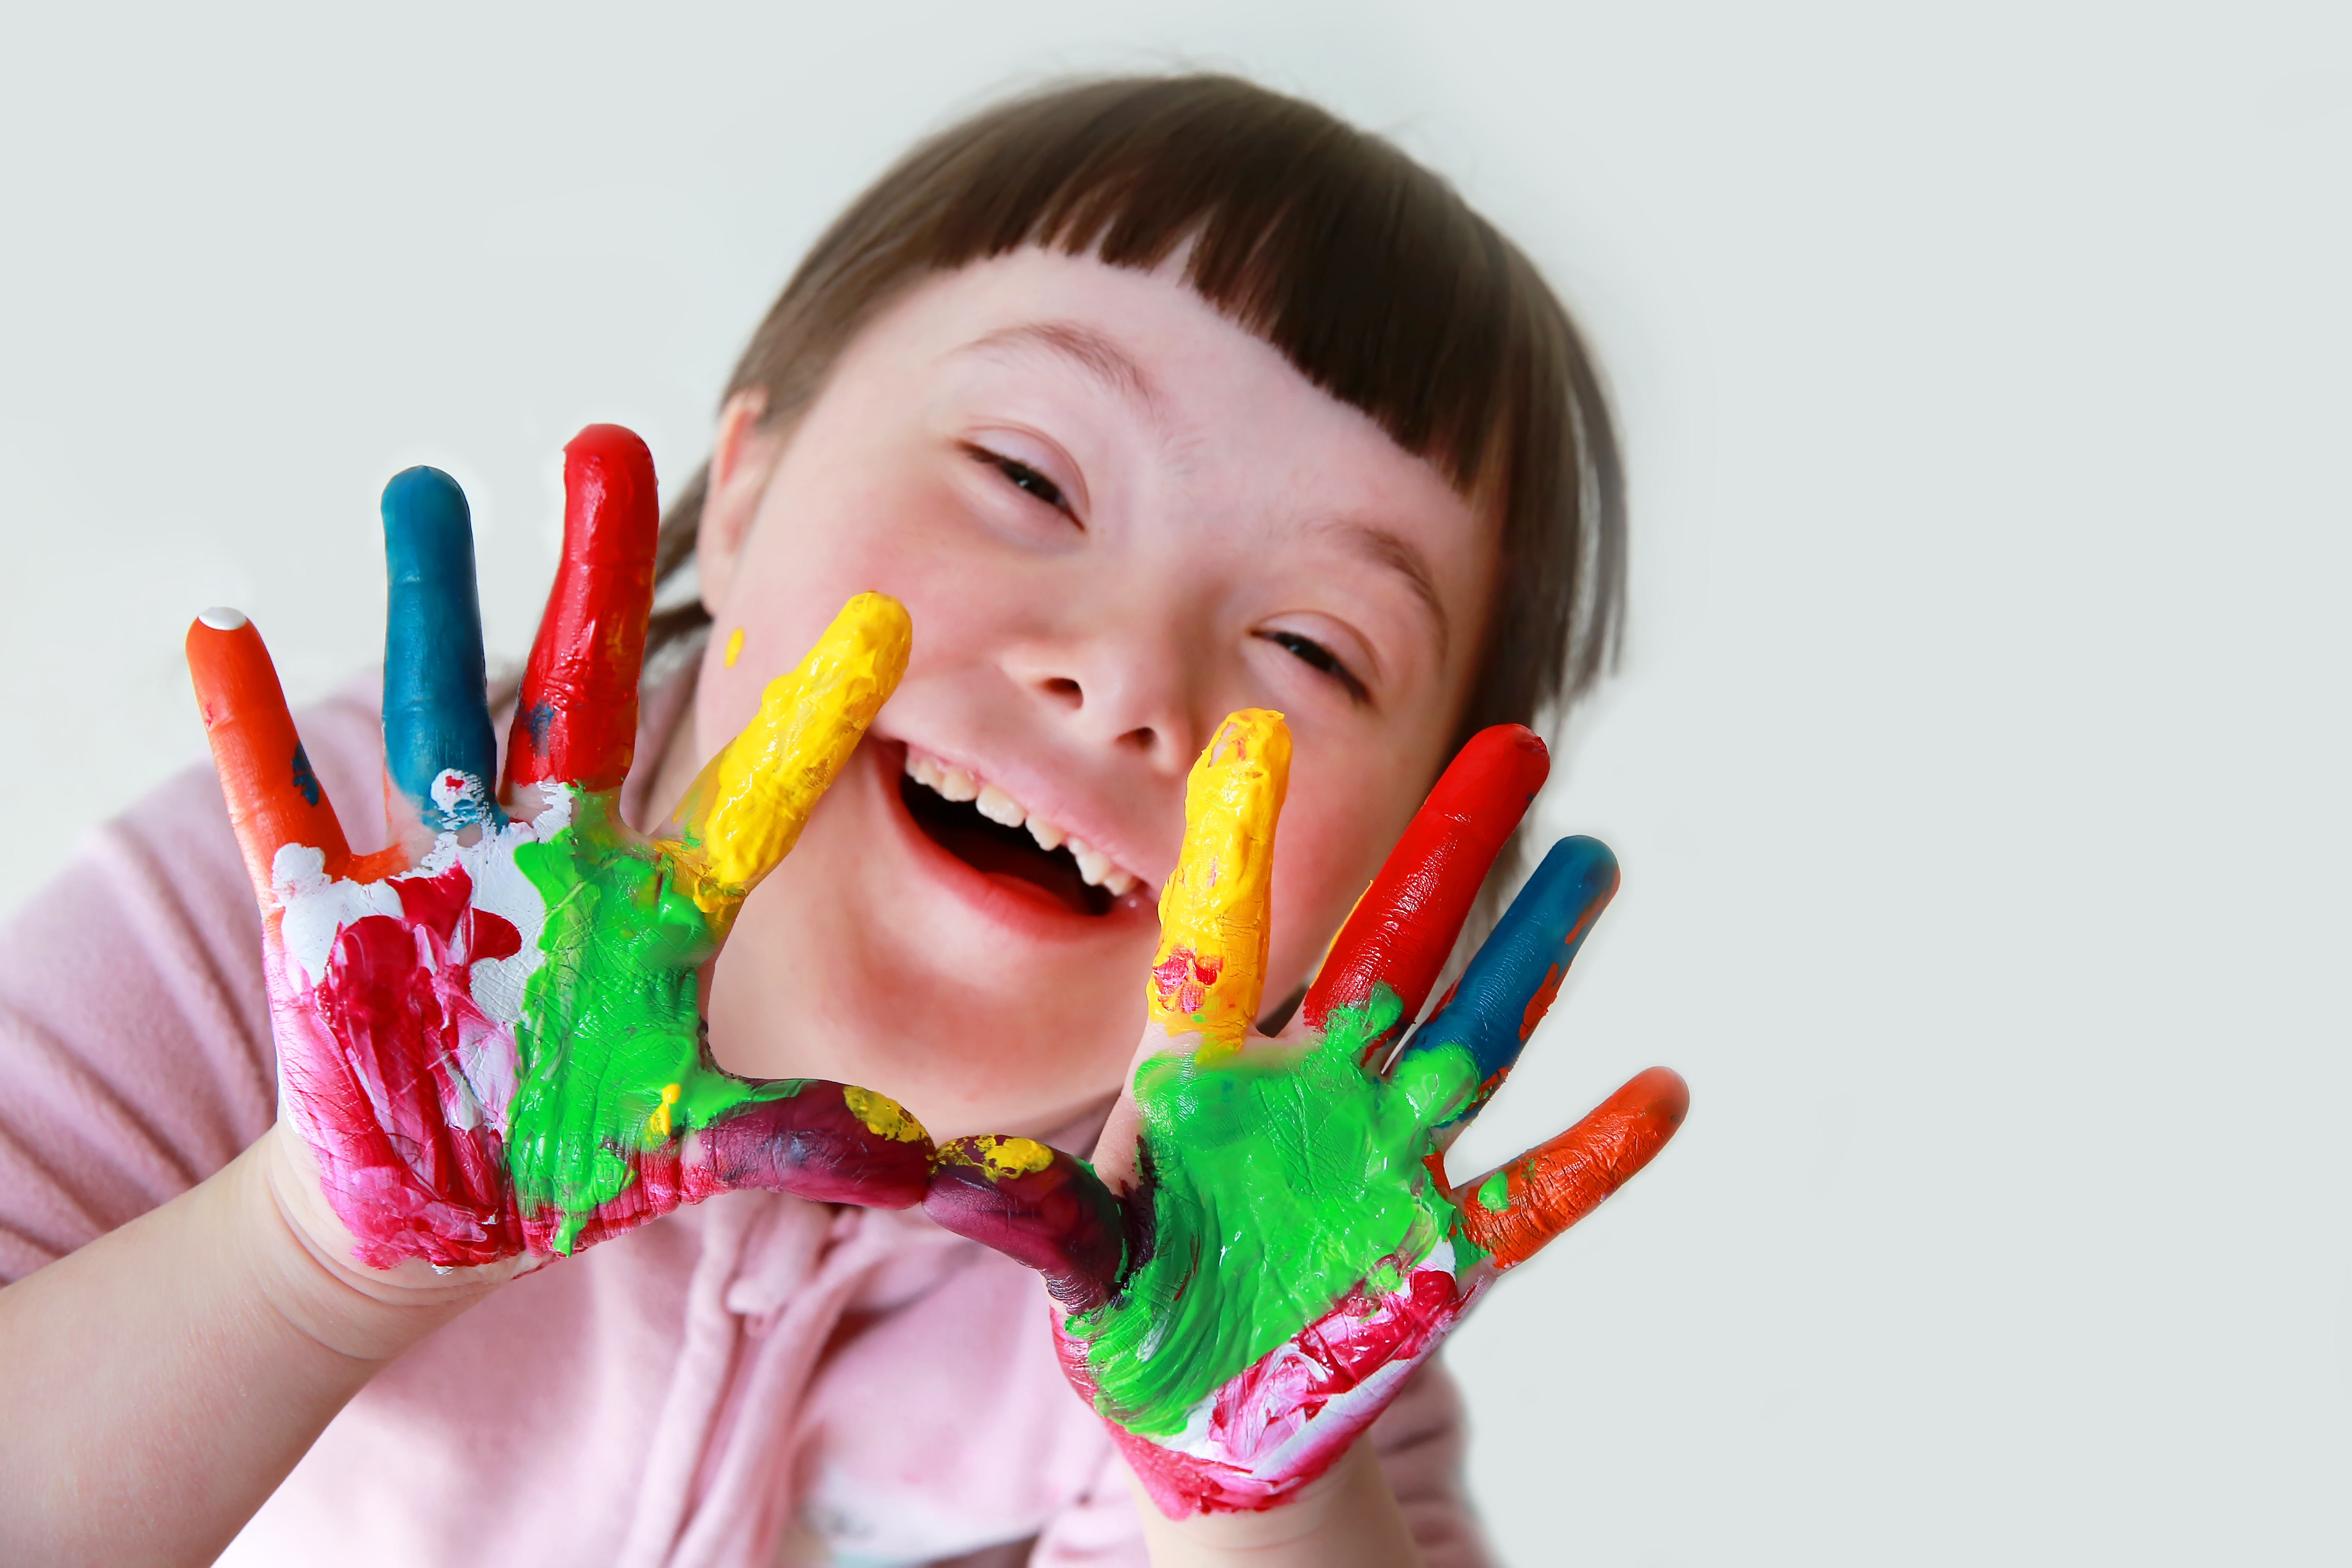 Girl with Down syndrome. Her hands are covered in colorful paint.